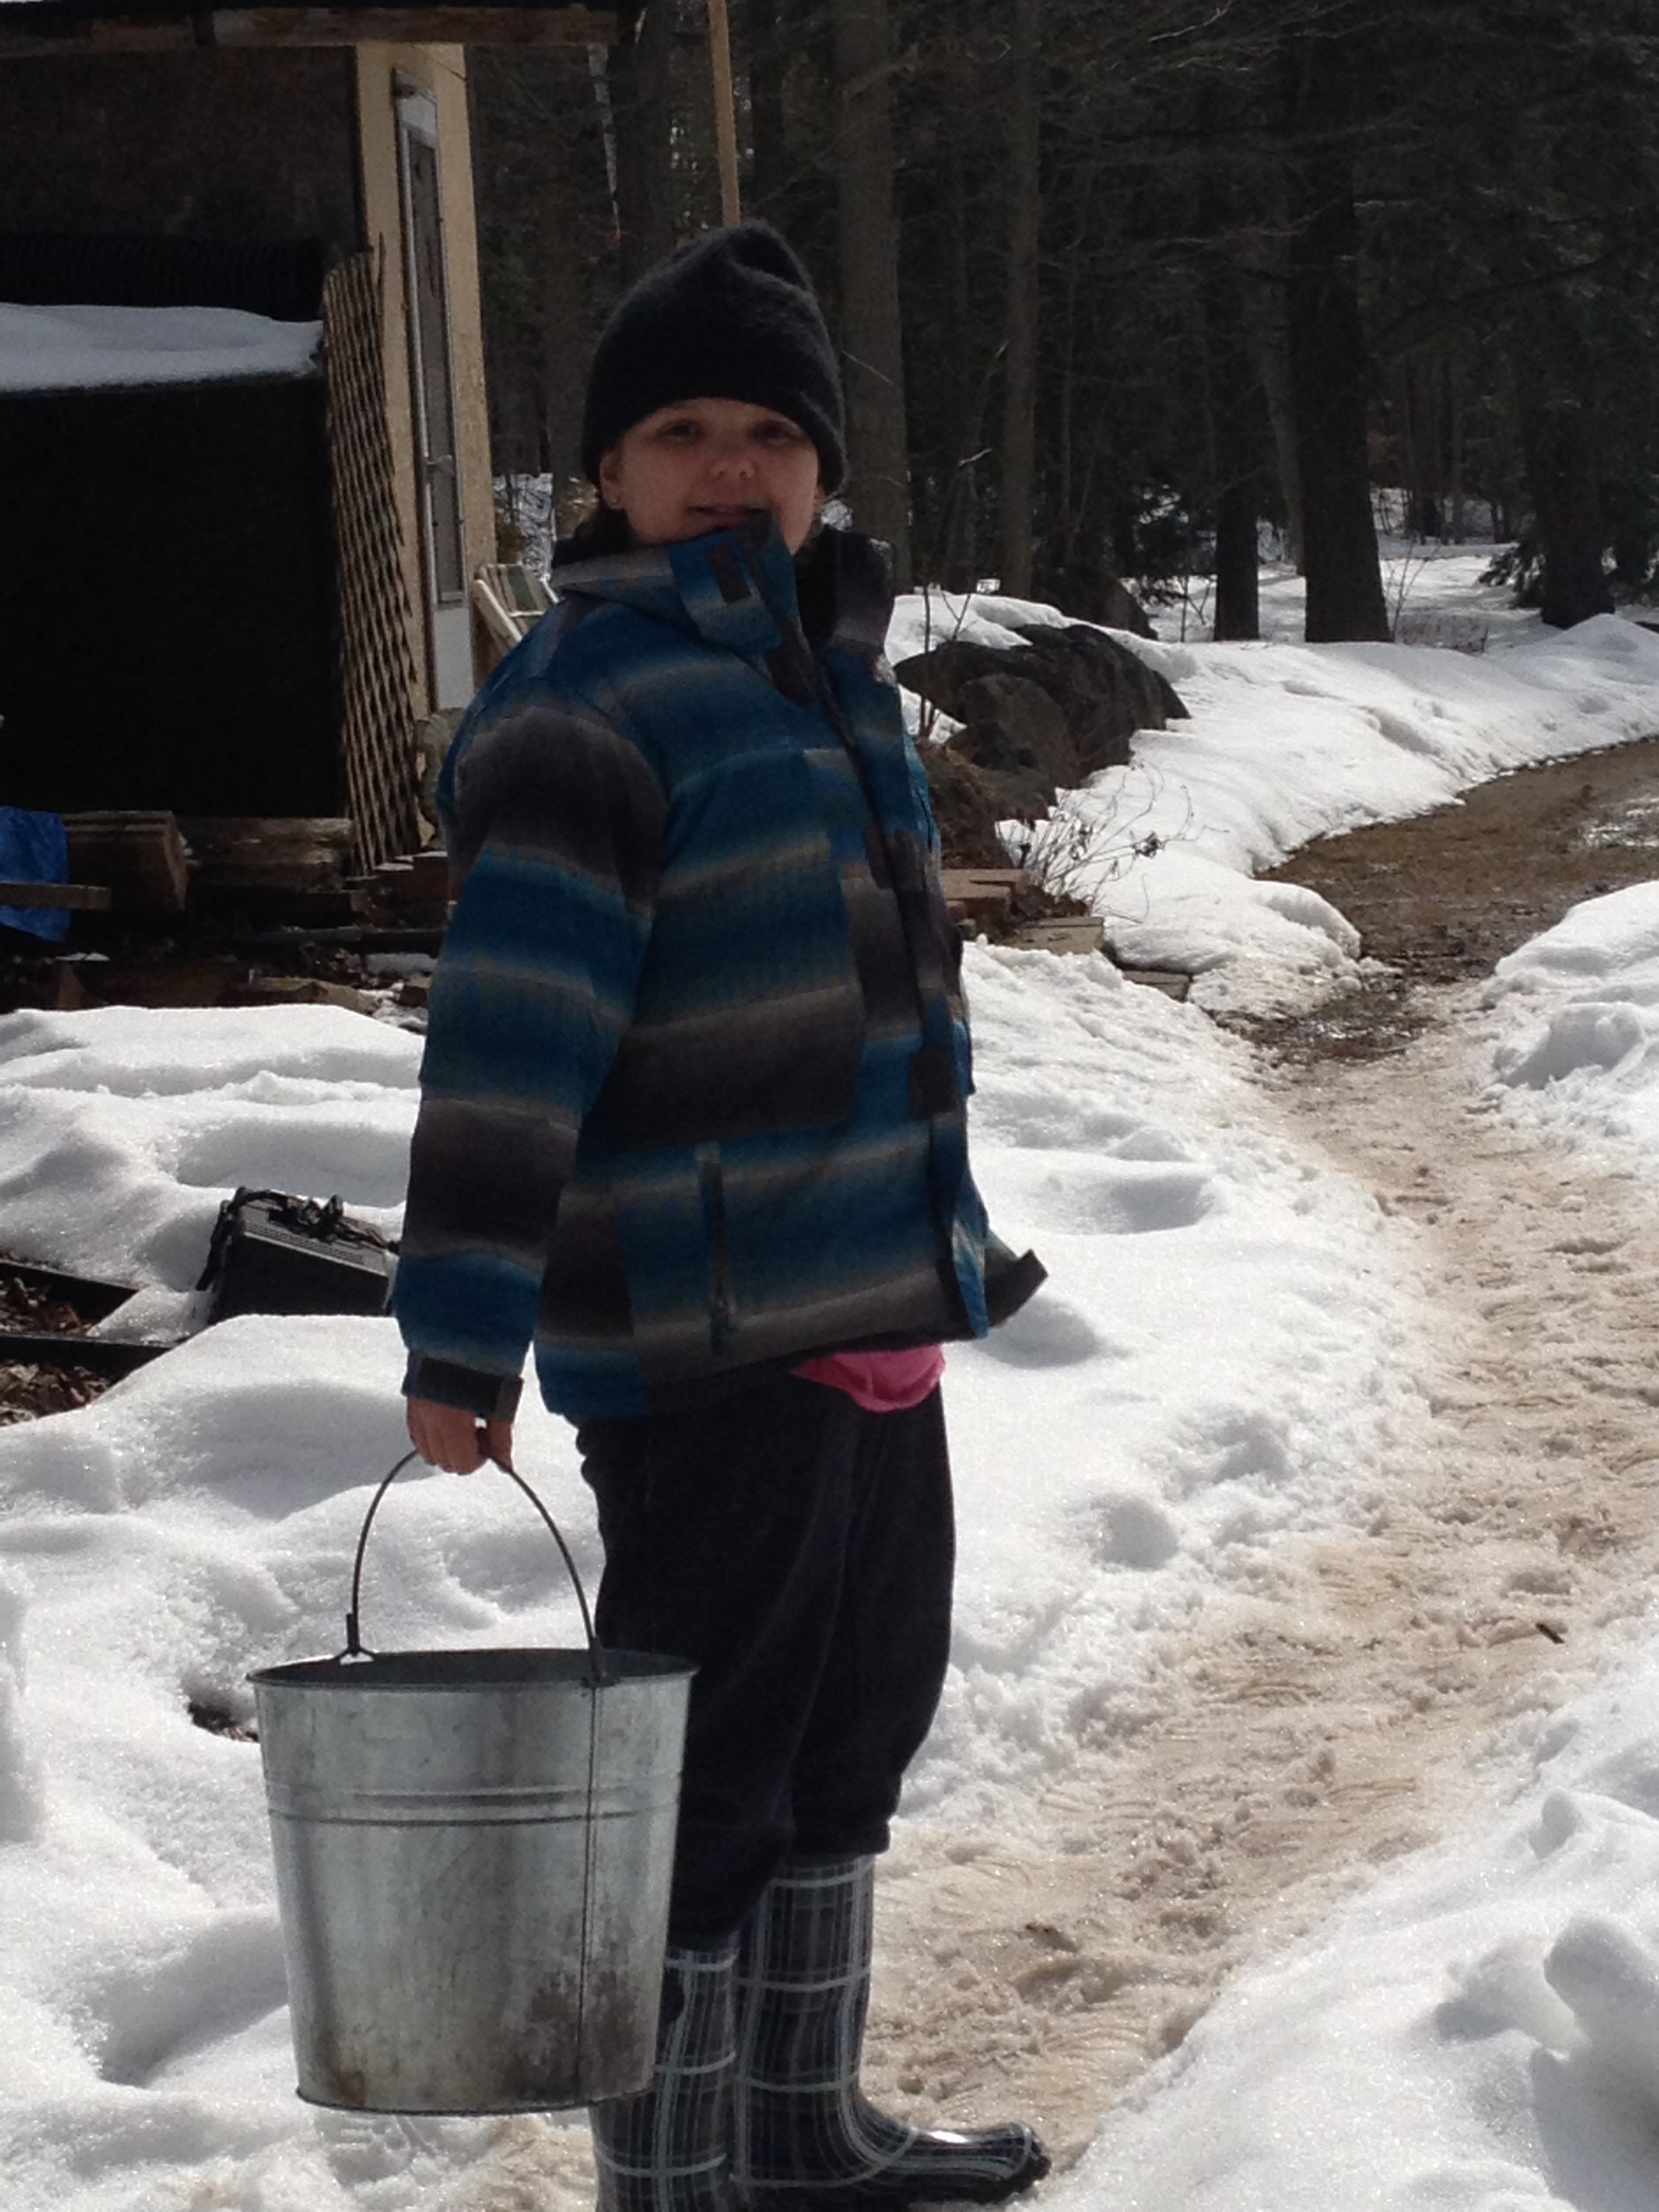 Collecting sap to make maple syrup!